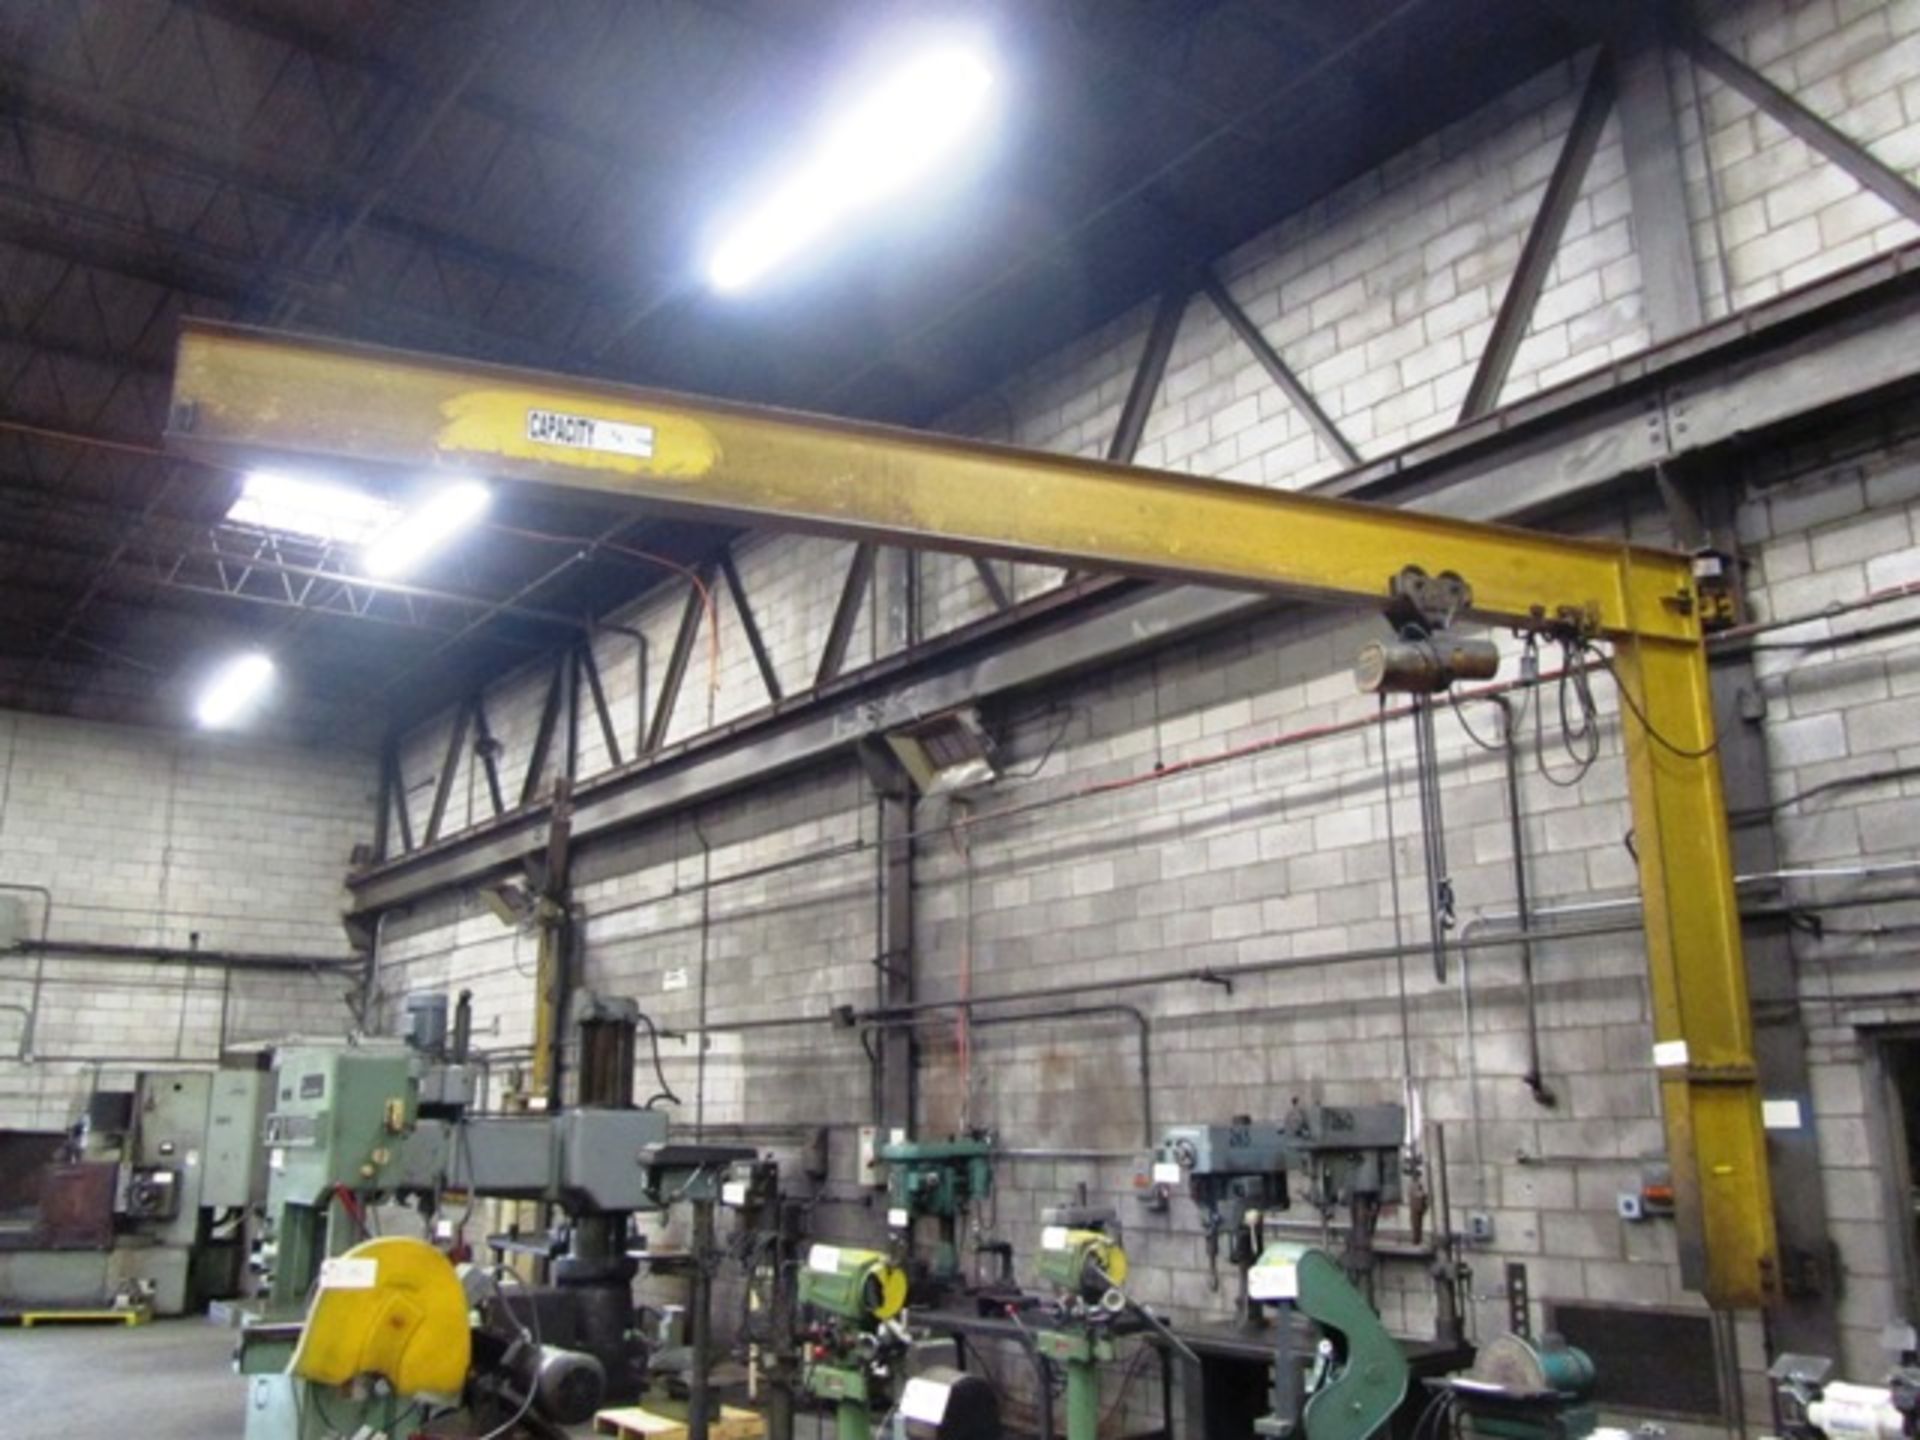 1/4 Ton Wall Mounted Jib Crane with Budgit 1/2 Ton Electric Hoist with Pendant Control